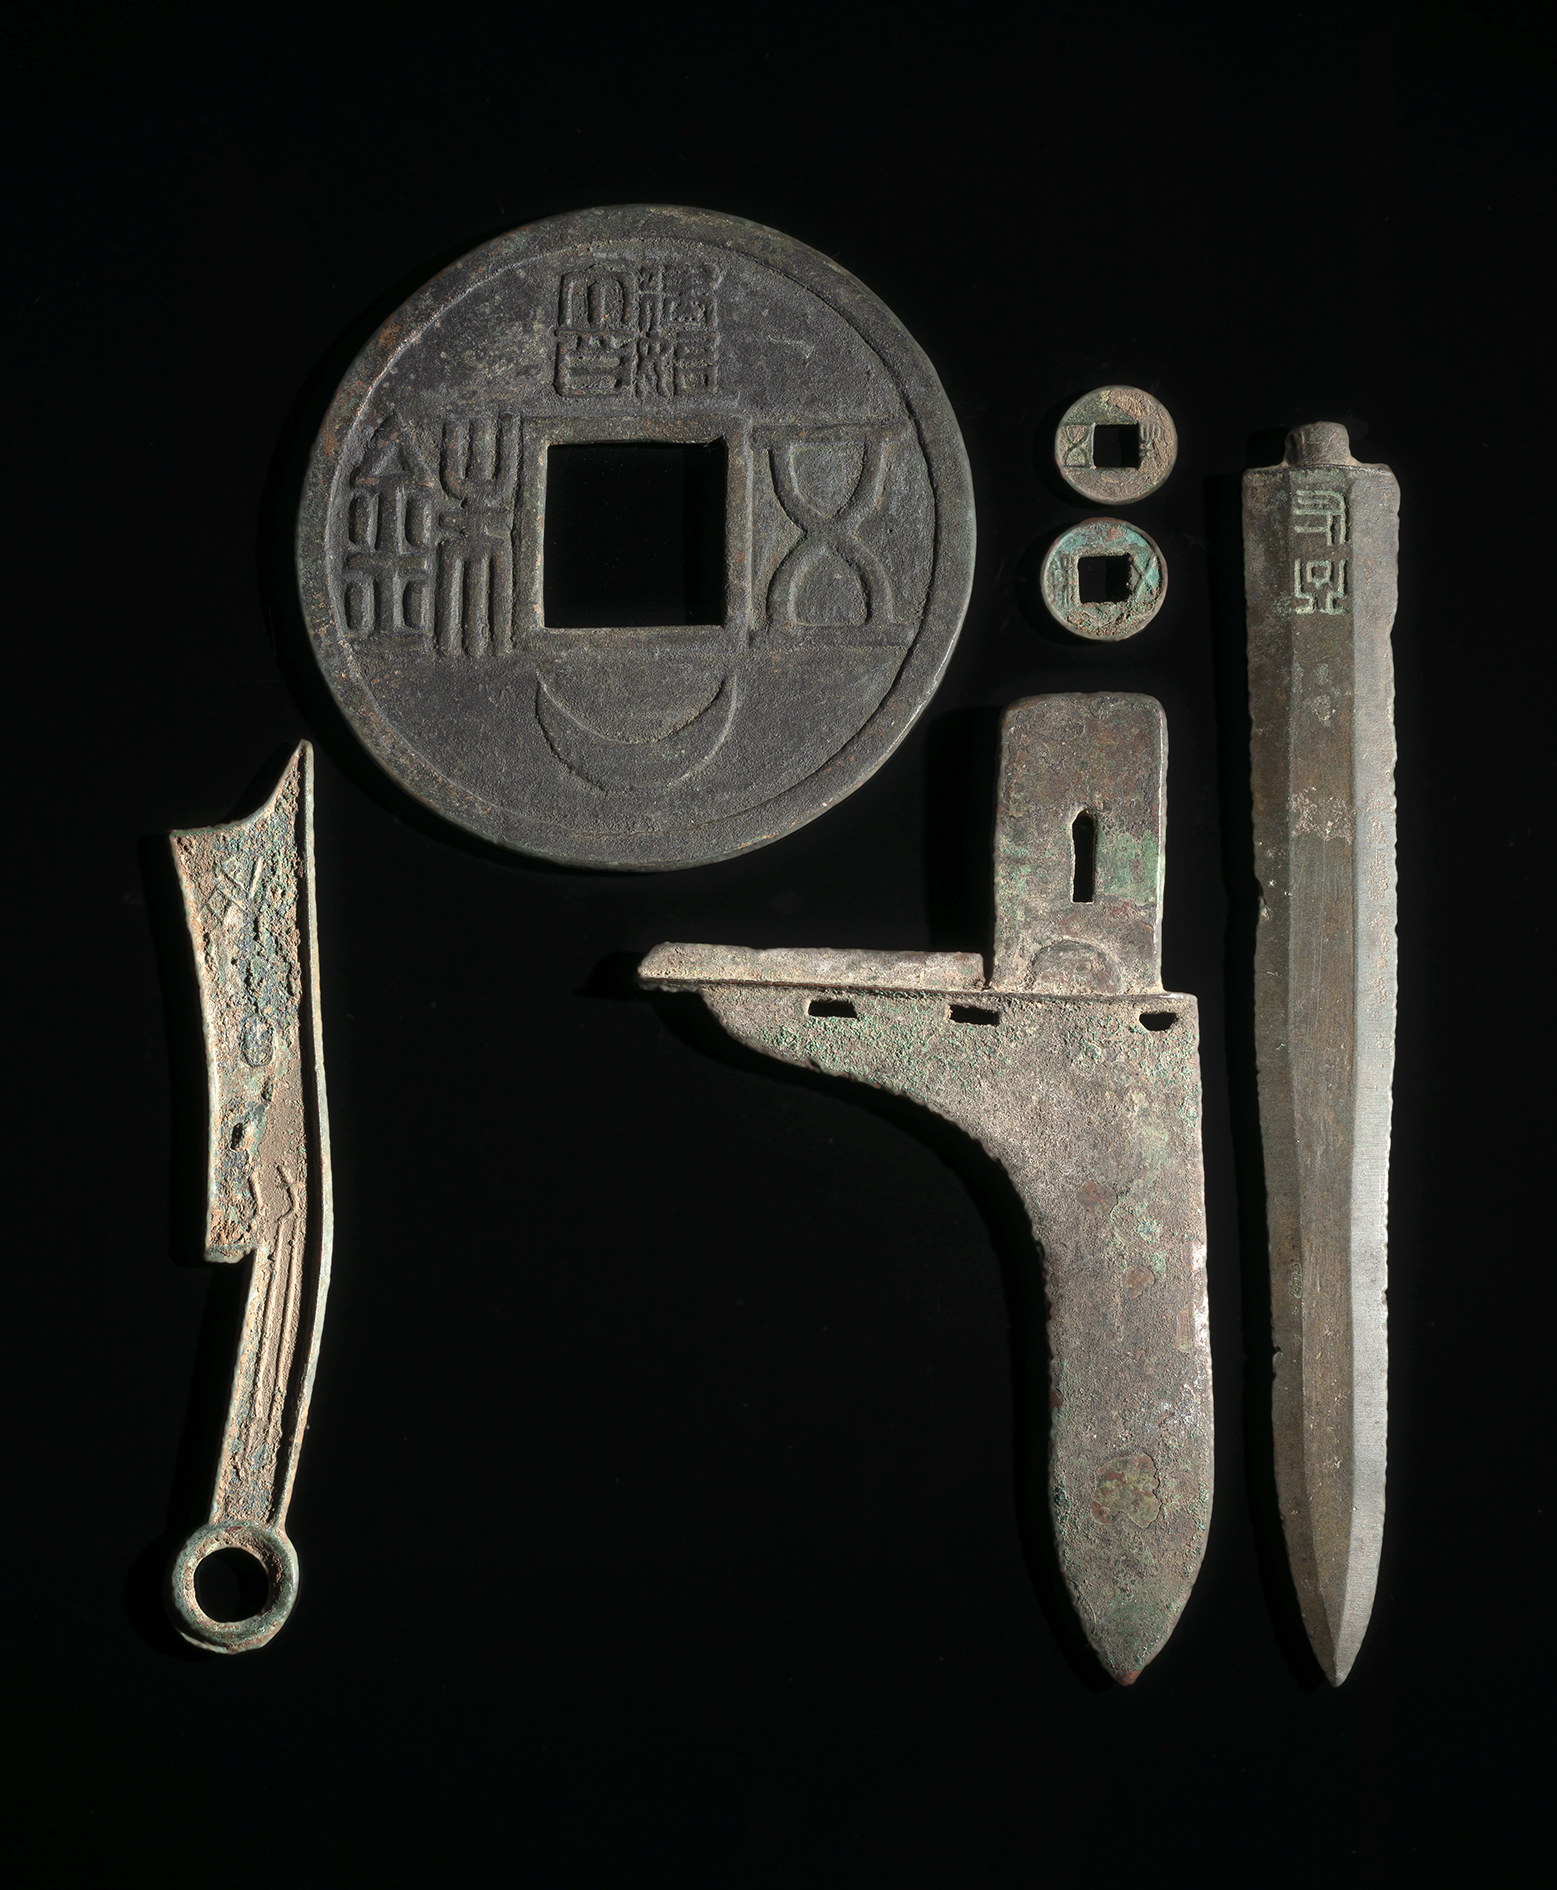 A GROUPE OF COINS AND WEAPONS